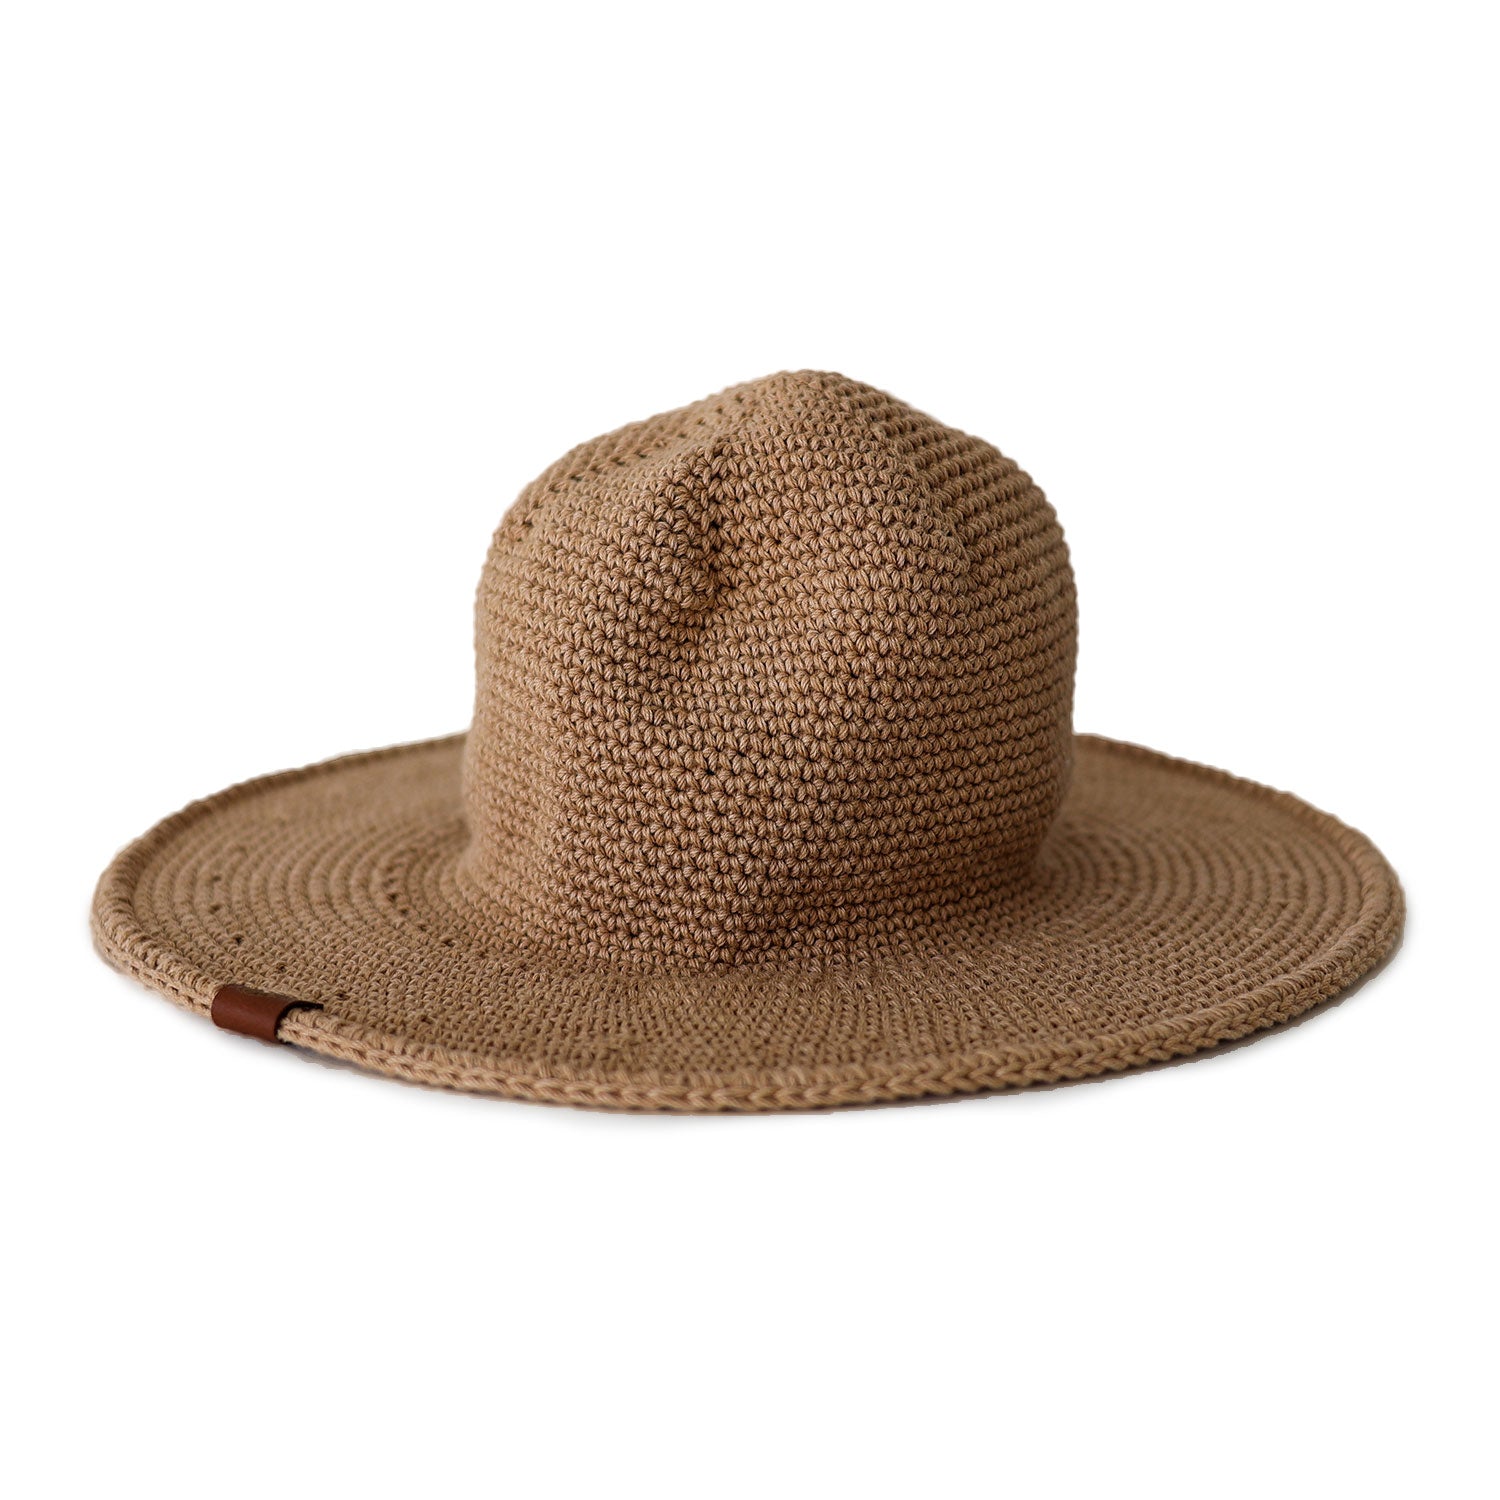 Packable Hat in Sand Color  Dye-free Organic Cotton Hats – North